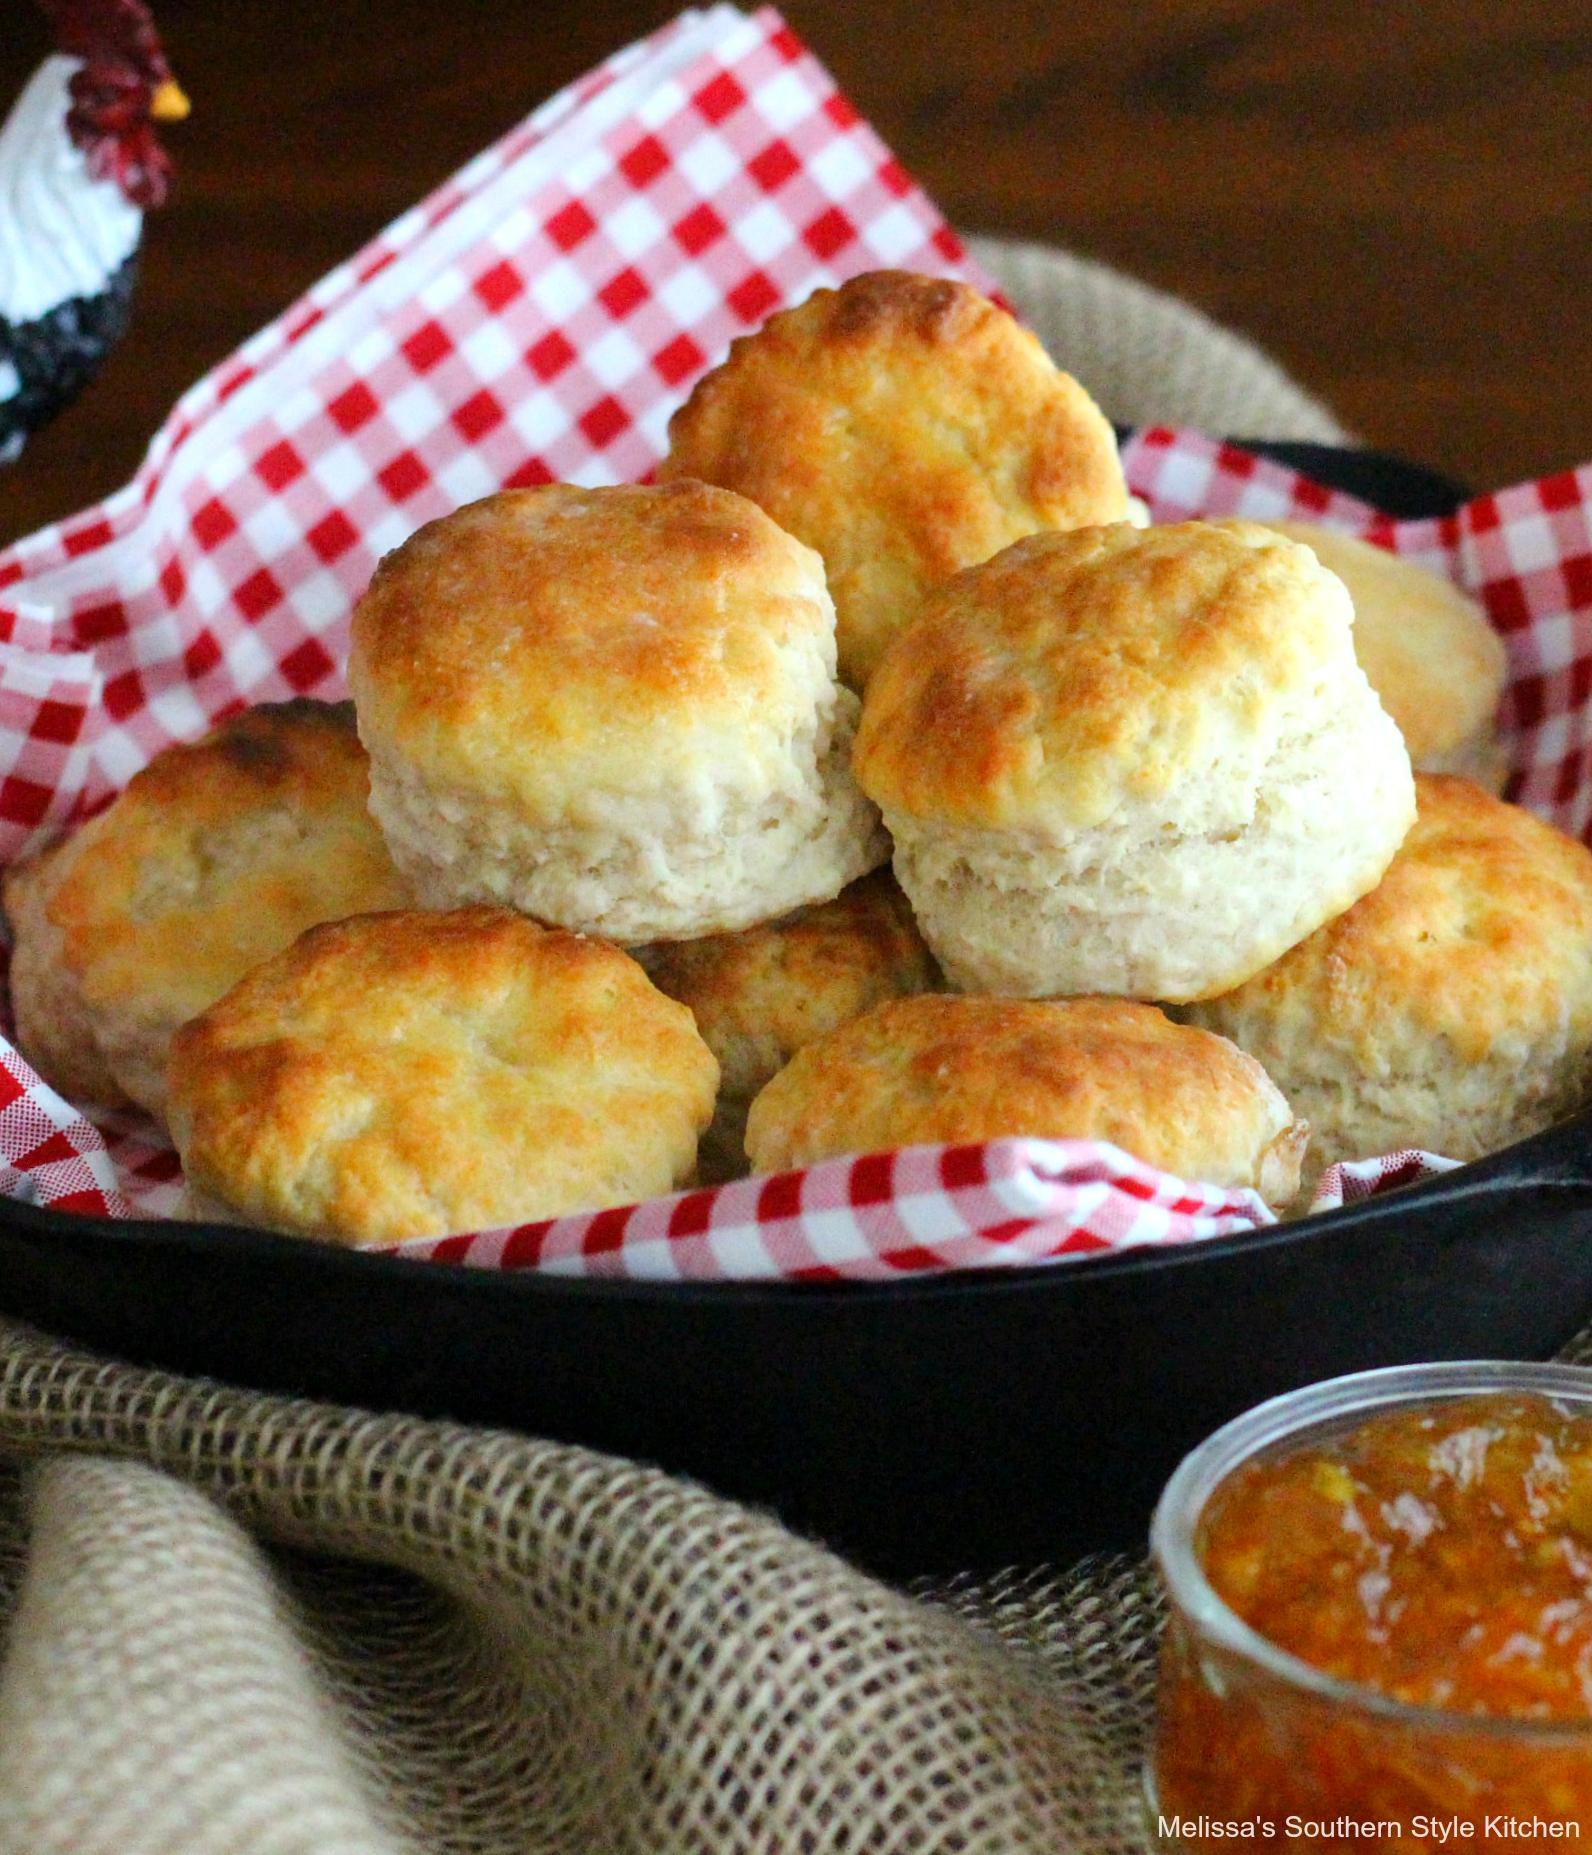  These biscuits are perfect for breakfast, brunch, or even as a side for dinner.